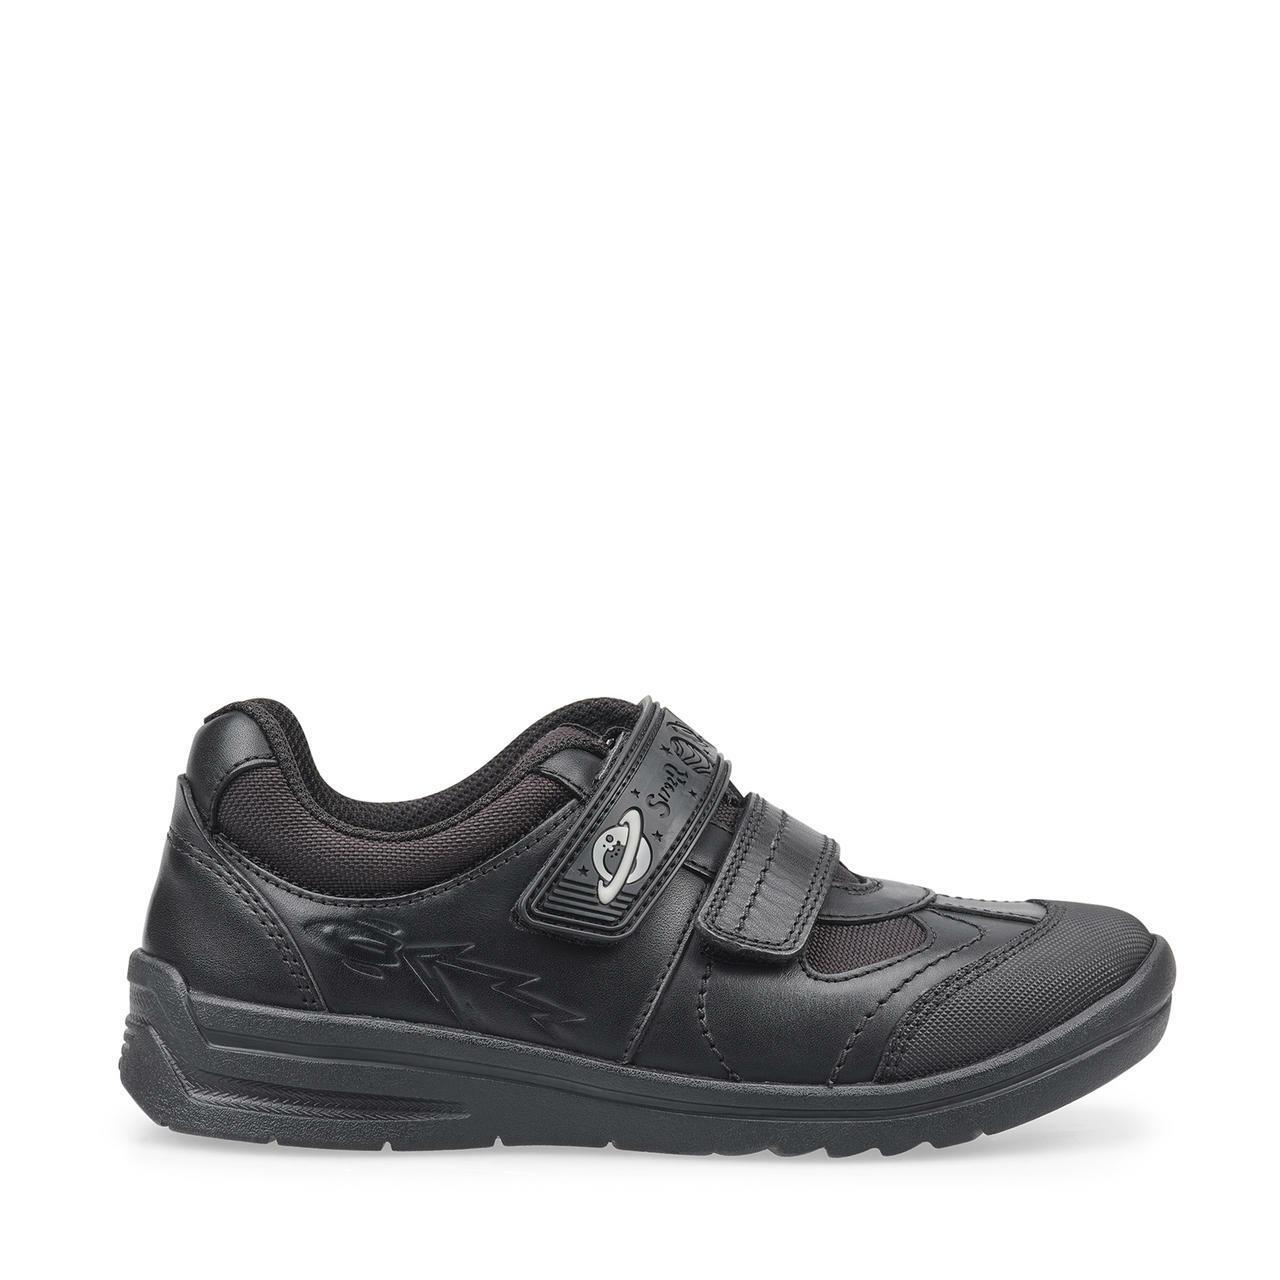 A boys school shoe by Start Rite,style Rocket, in black leather with double velcro fastening. Right side view.